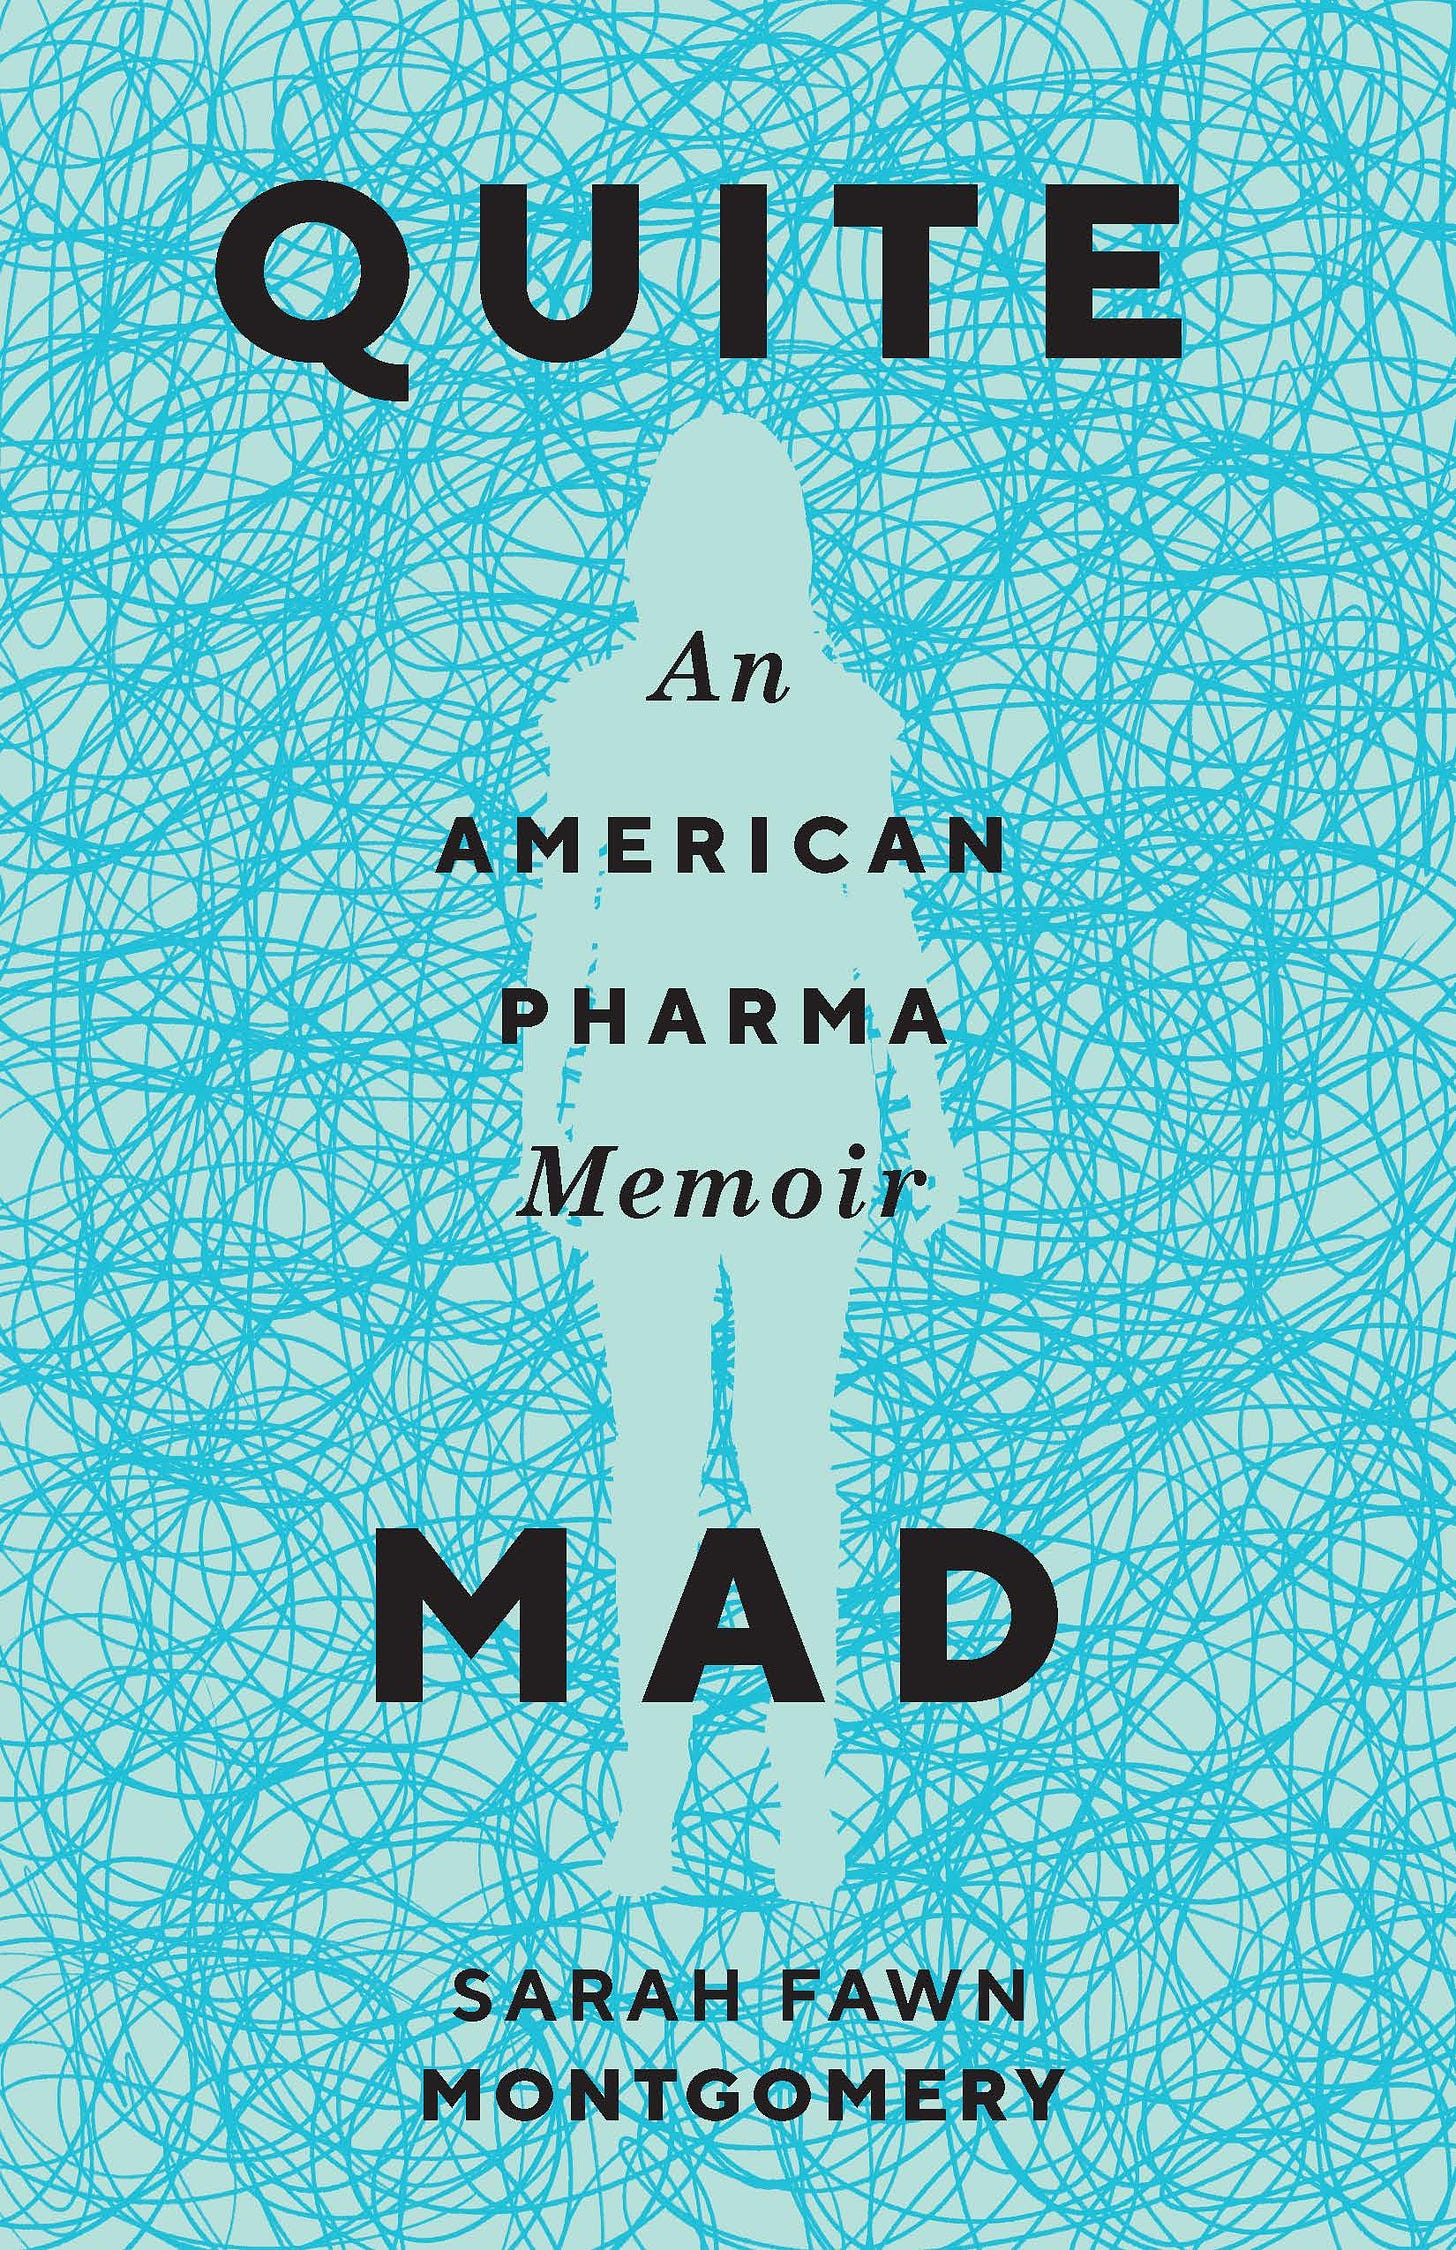 A pale blue book cover with slightly darker blue scribbles all over it, revealing the silhouette of a person in the center. The title and byline are foregrounded in black.